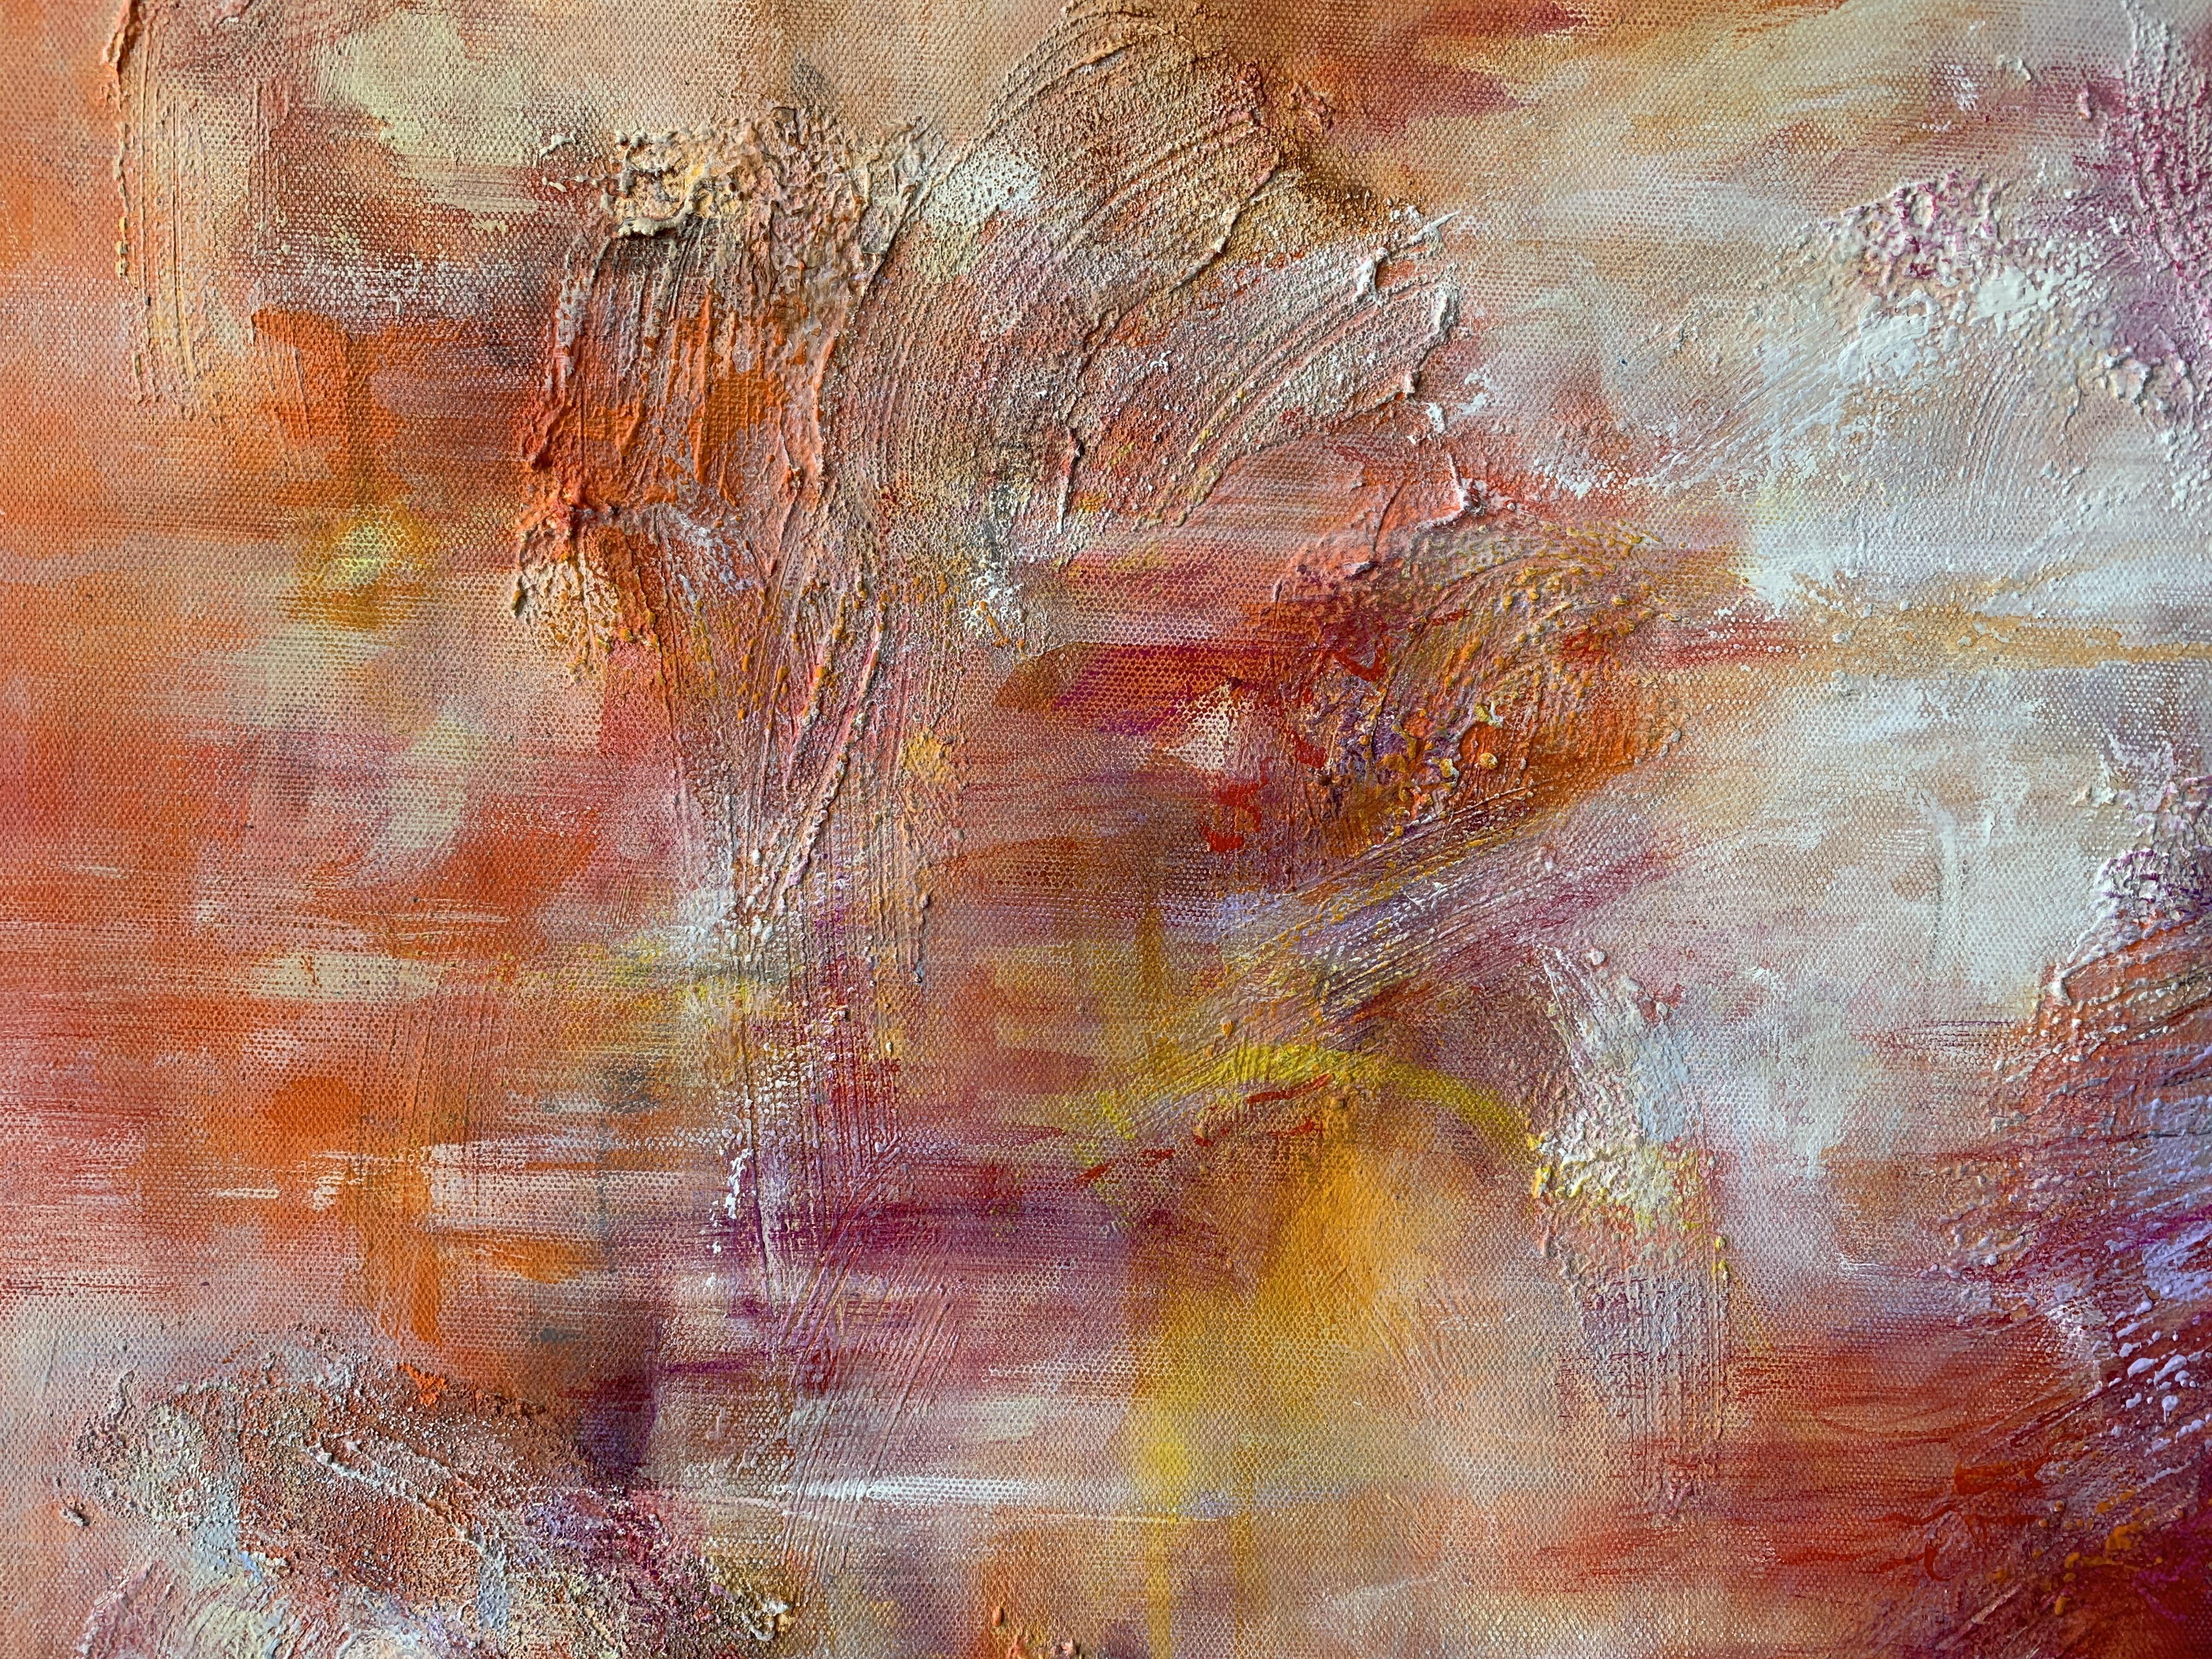 Elemental III, Painting, Acrylic on Canvas - Brown Abstract Painting by Katja Wittmer